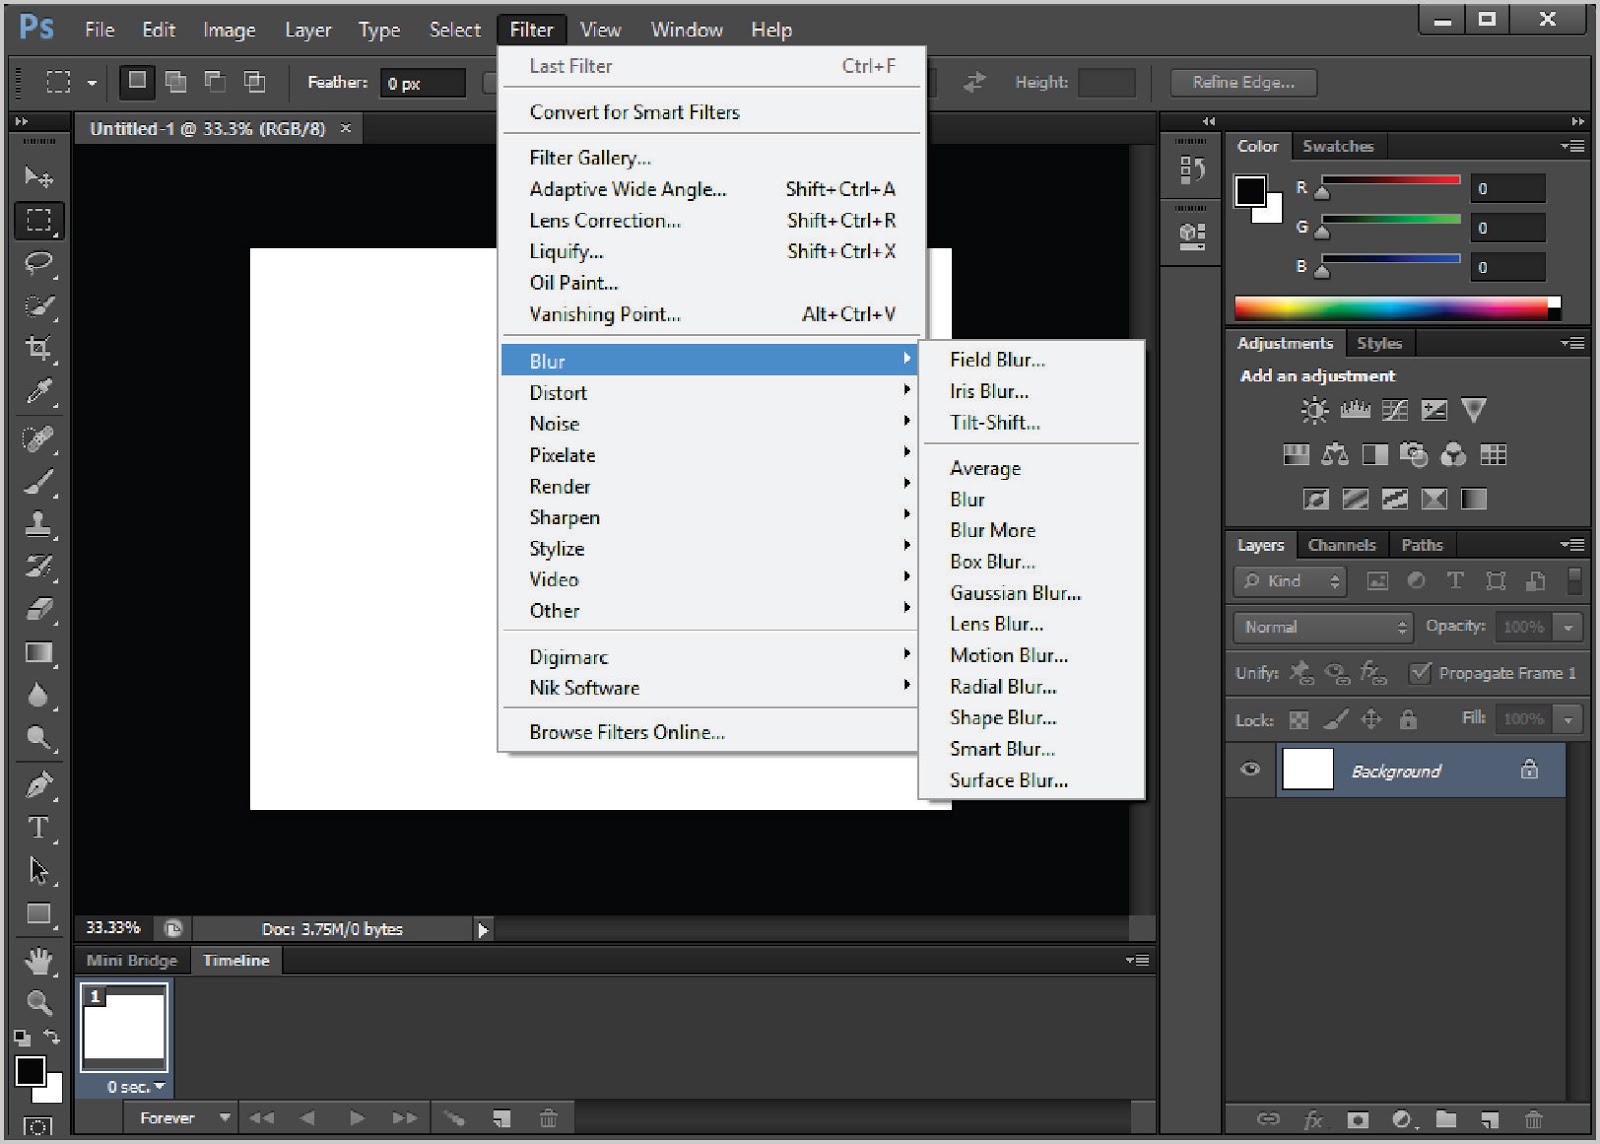 Adobe Photoshop Cs10 free. download full Version With Crack